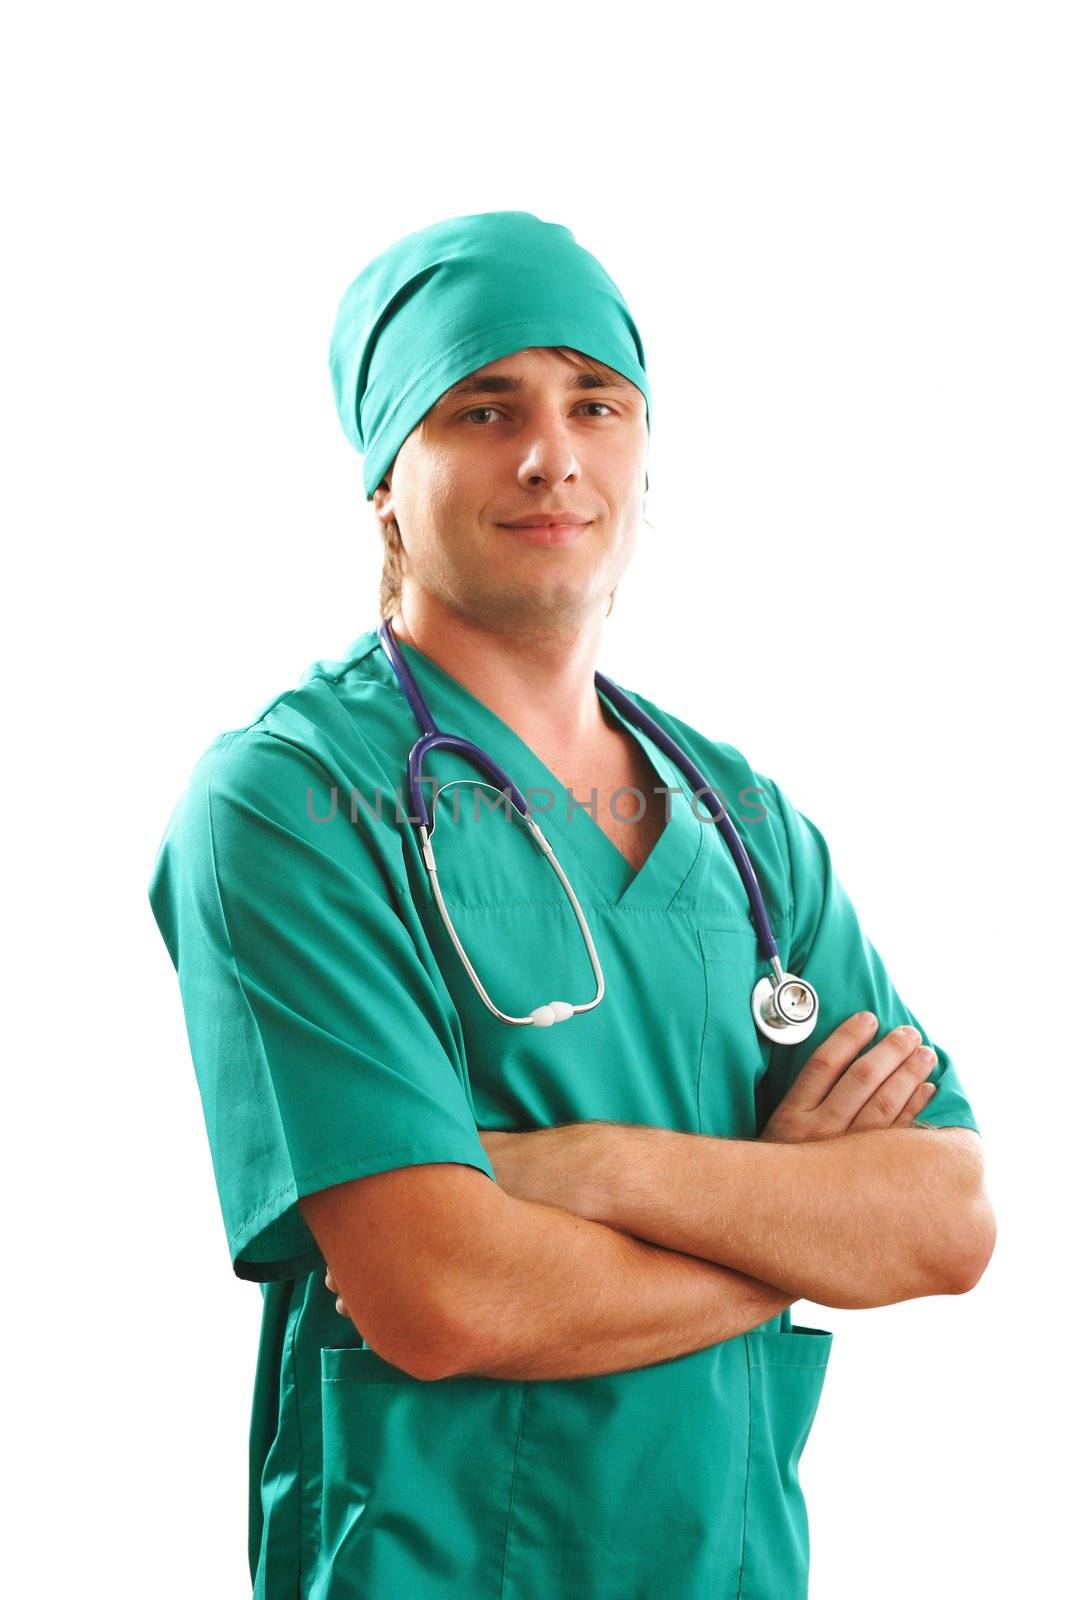 Doctor with stethoscope by haveseen